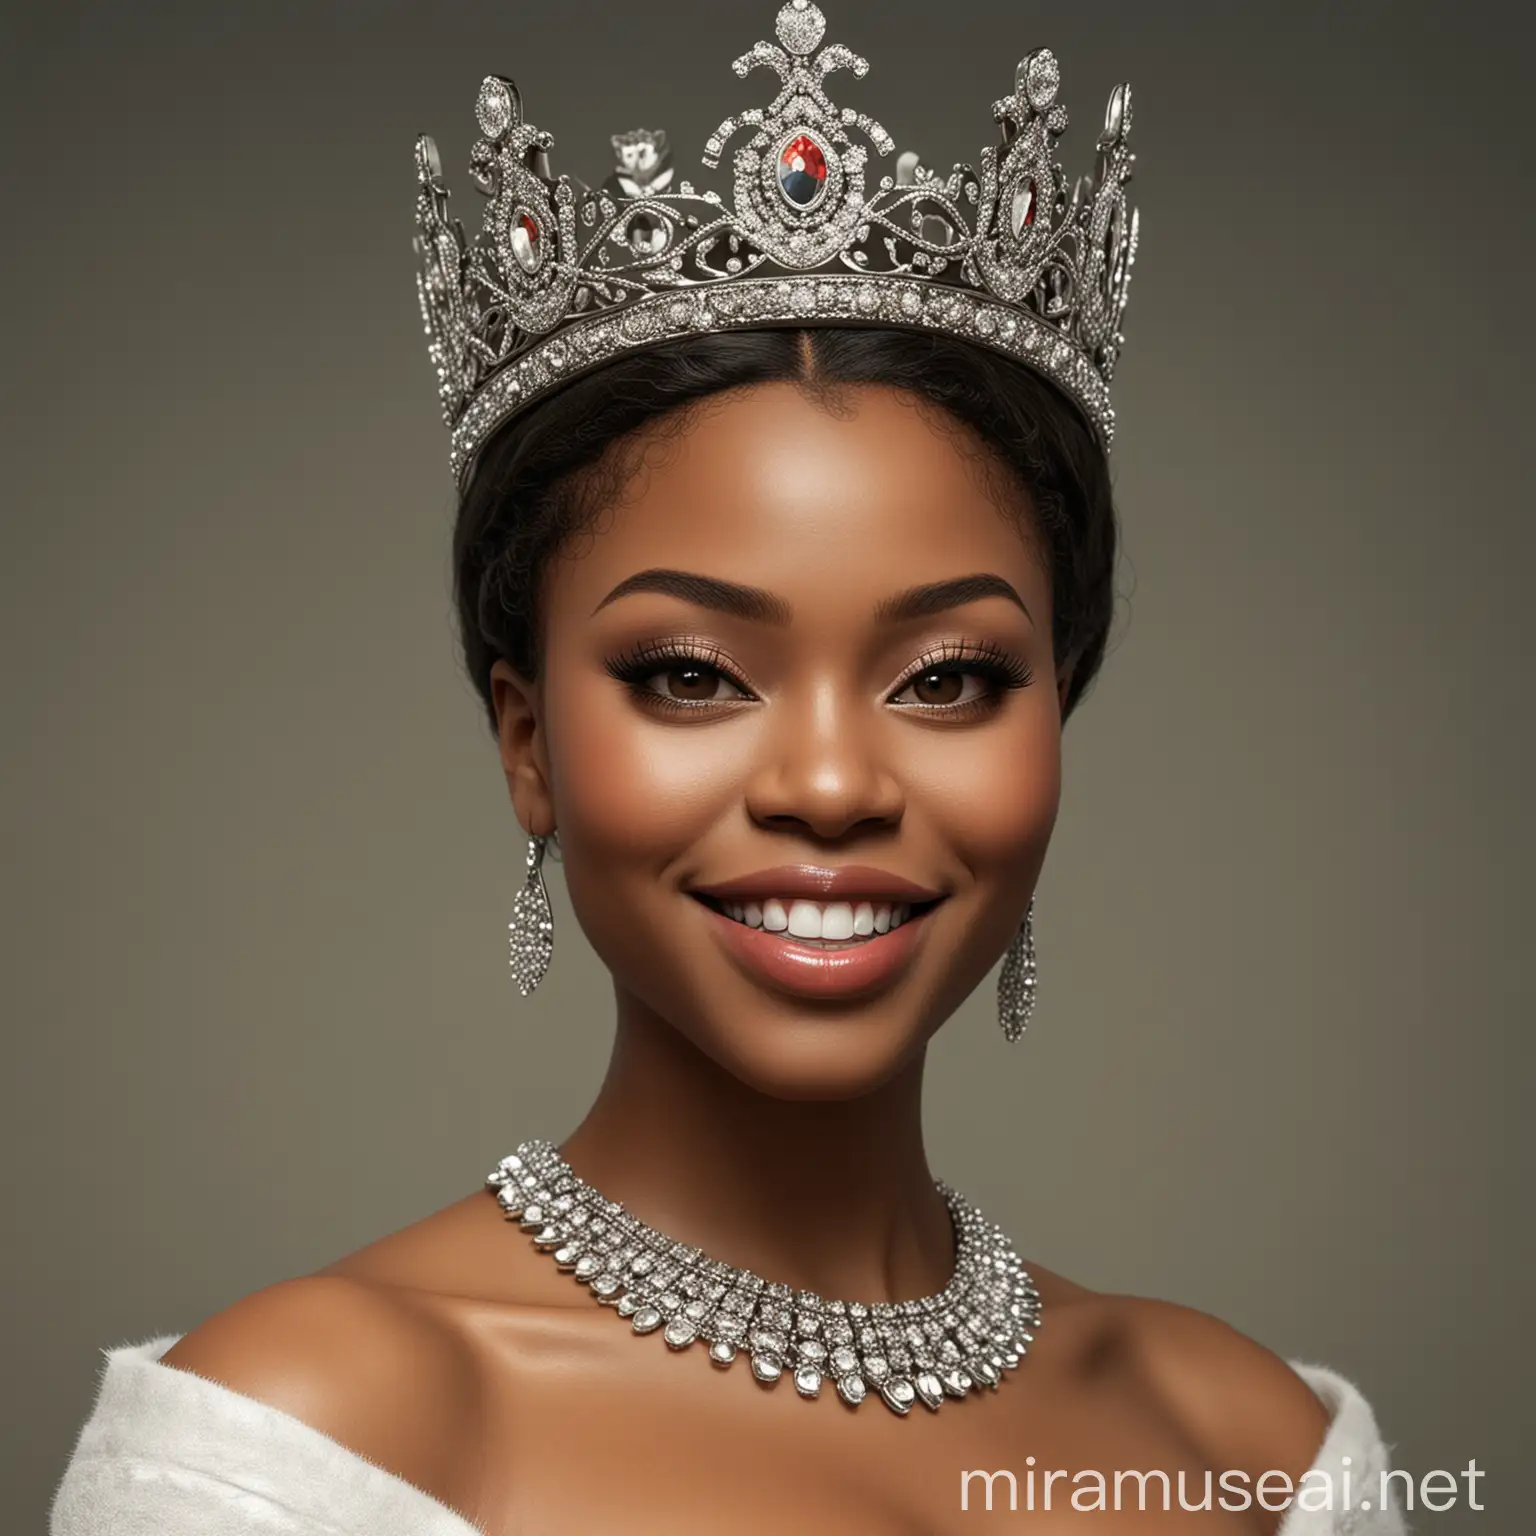 Stunning Nigerian Queen Smiling Gracefully with Crown